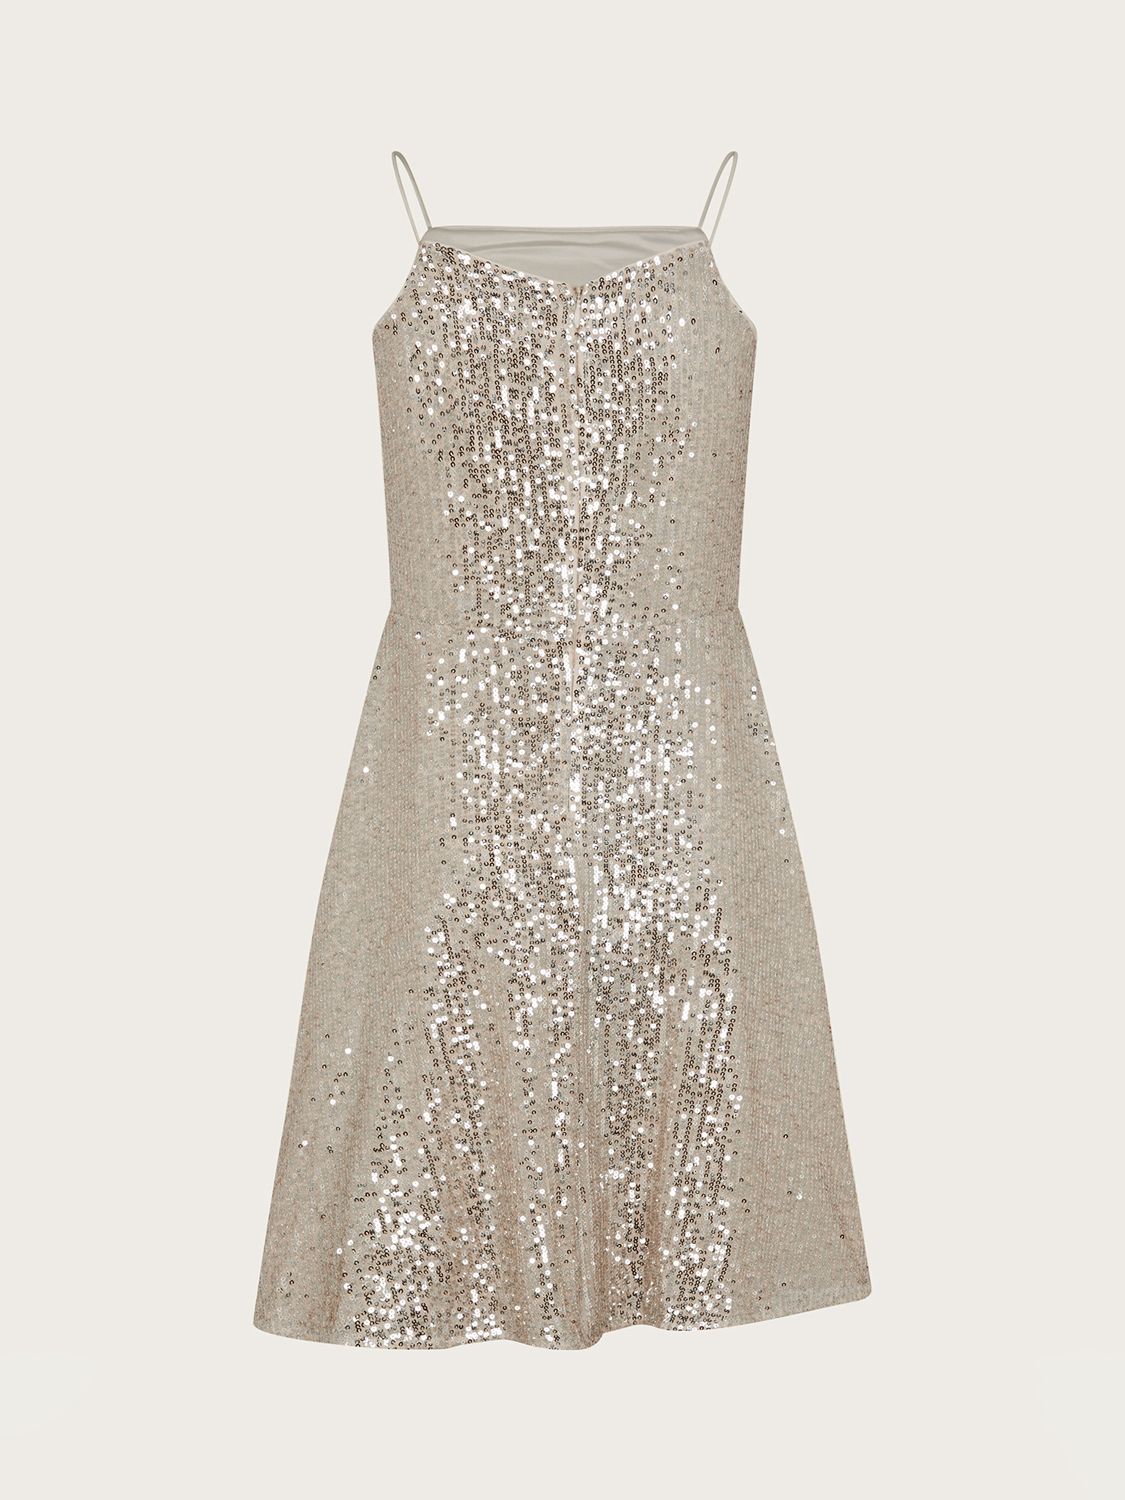 Buy Monsoon Kids' Charlotte Sequin Cut Out Party Dress, Champagne Online at johnlewis.com